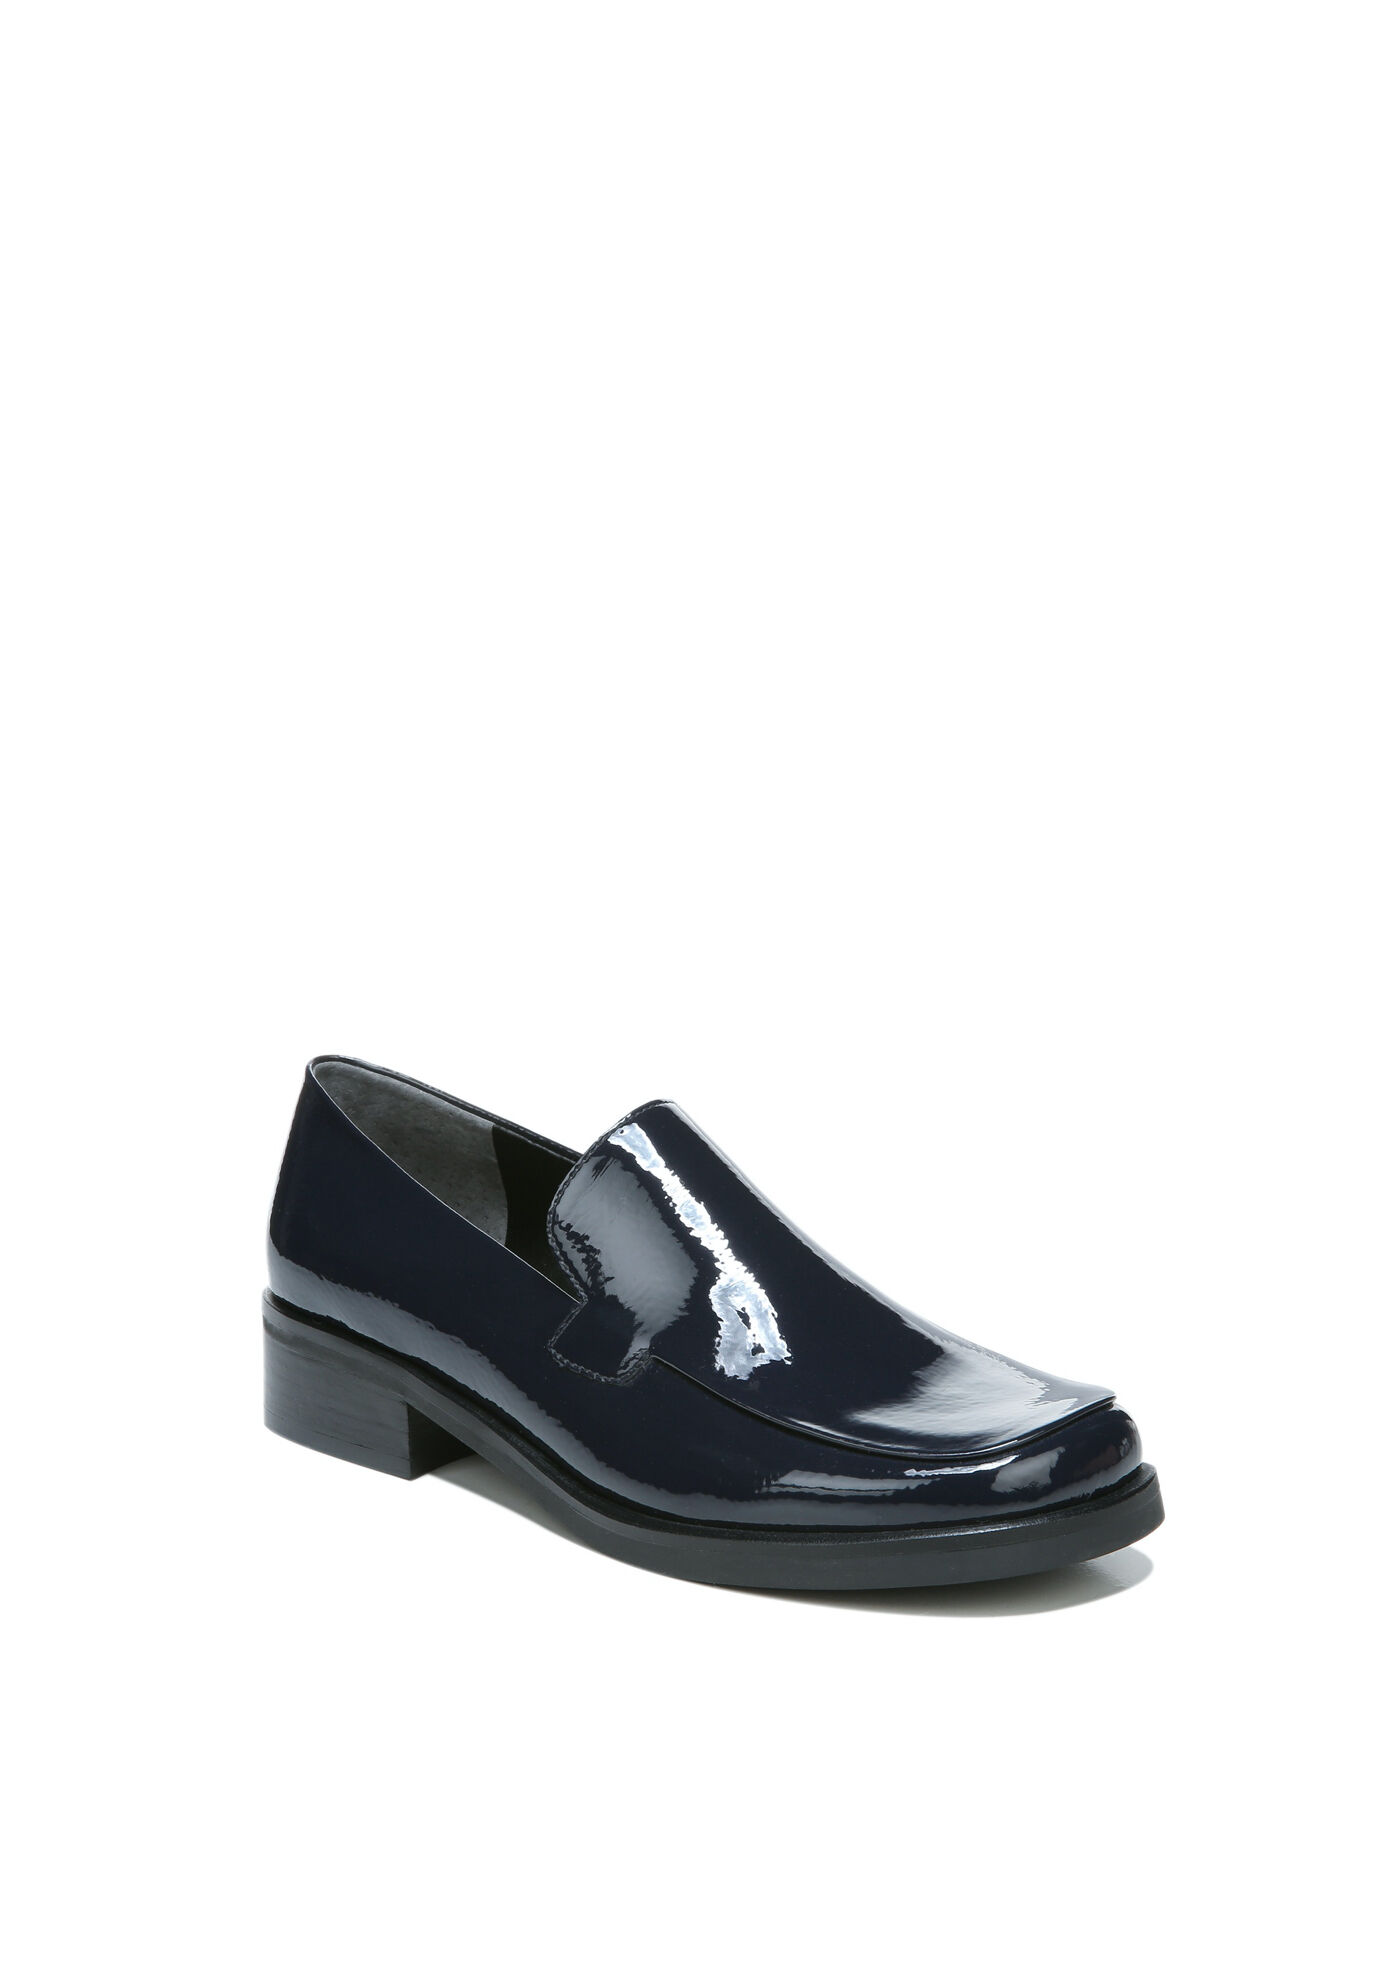 Women's Bocca Loafer by Franco Sarto in Midnight (Size 6 M)